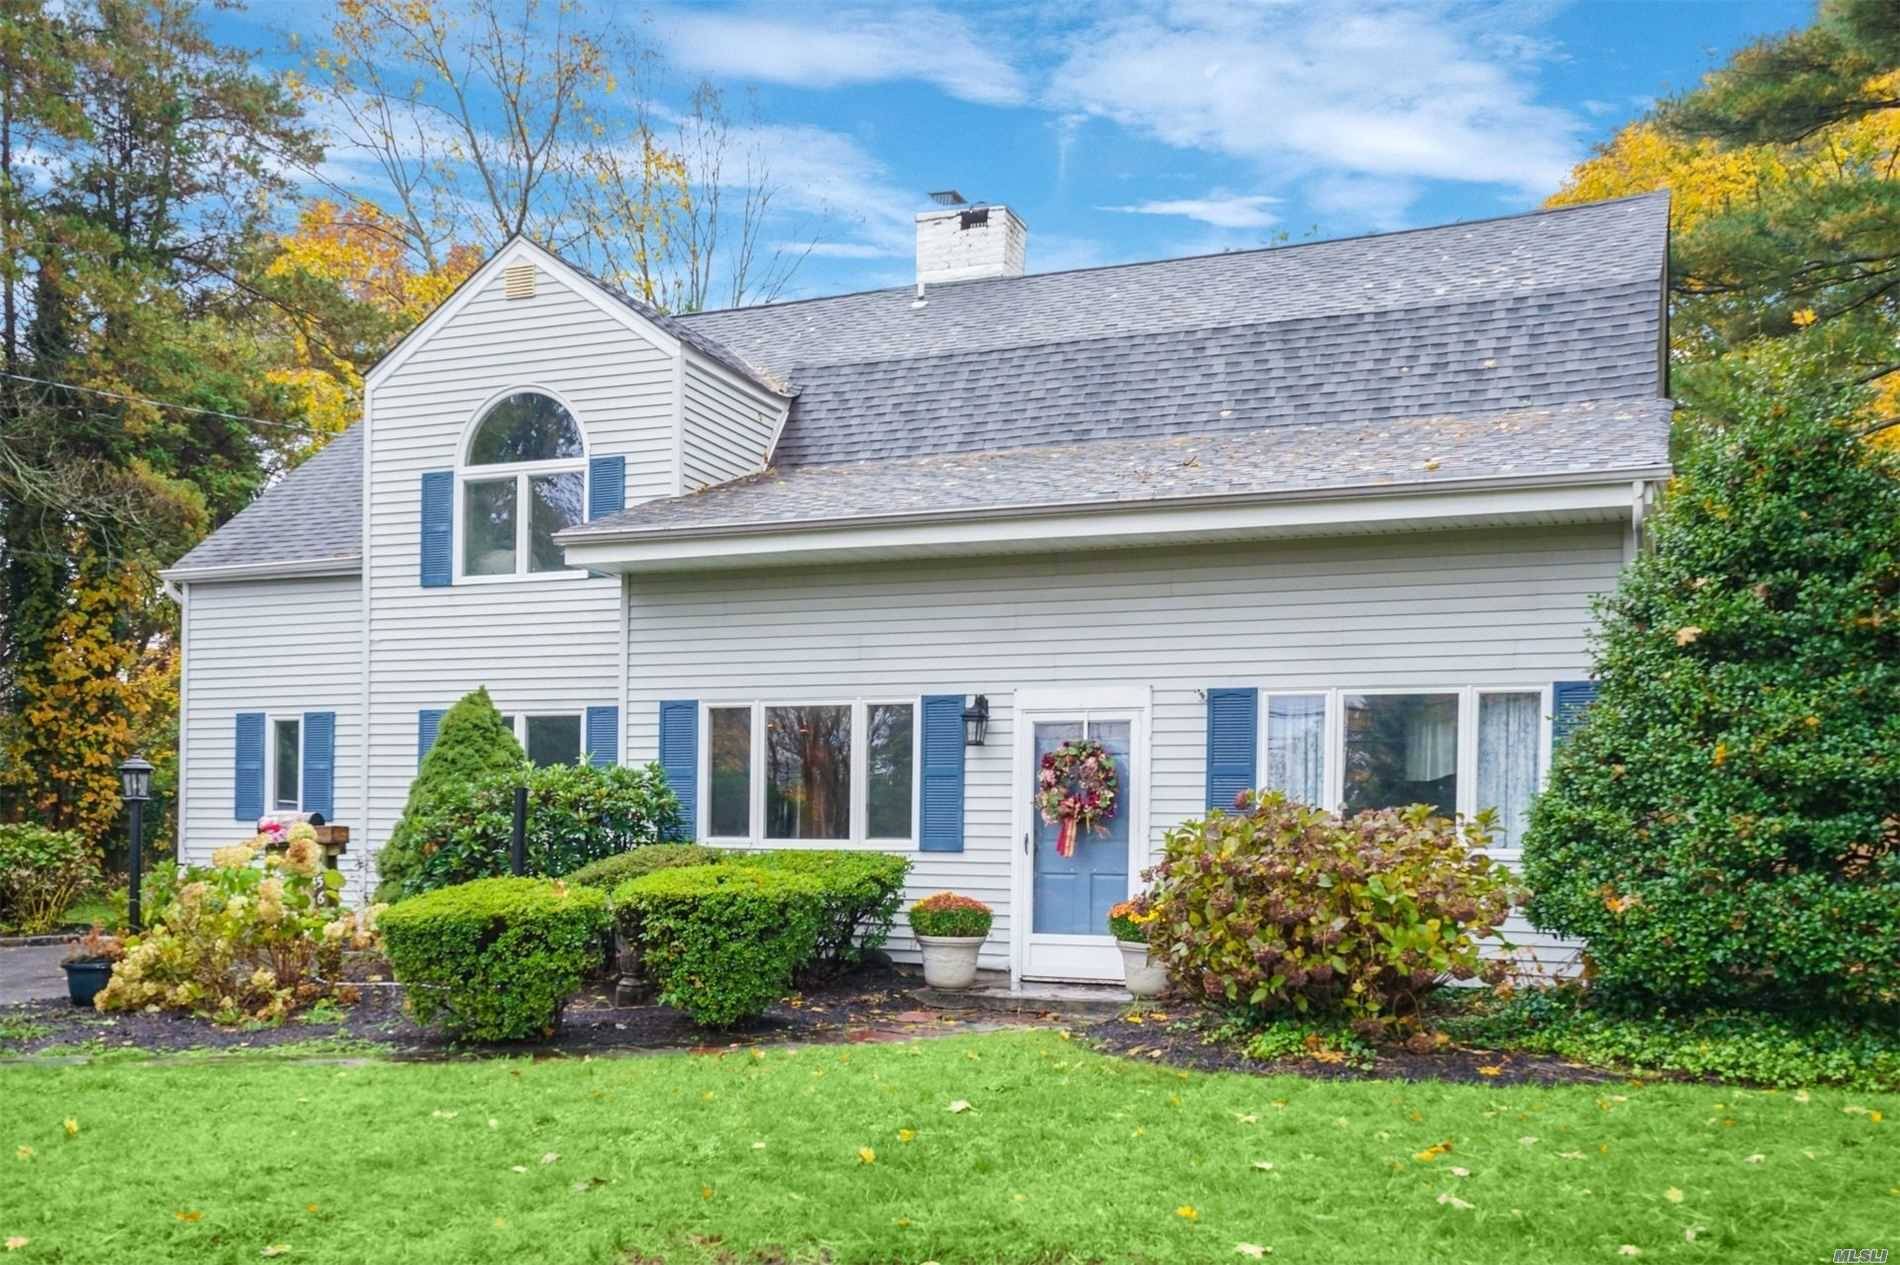 Make This Well Maintained Large Colonial Your Own !